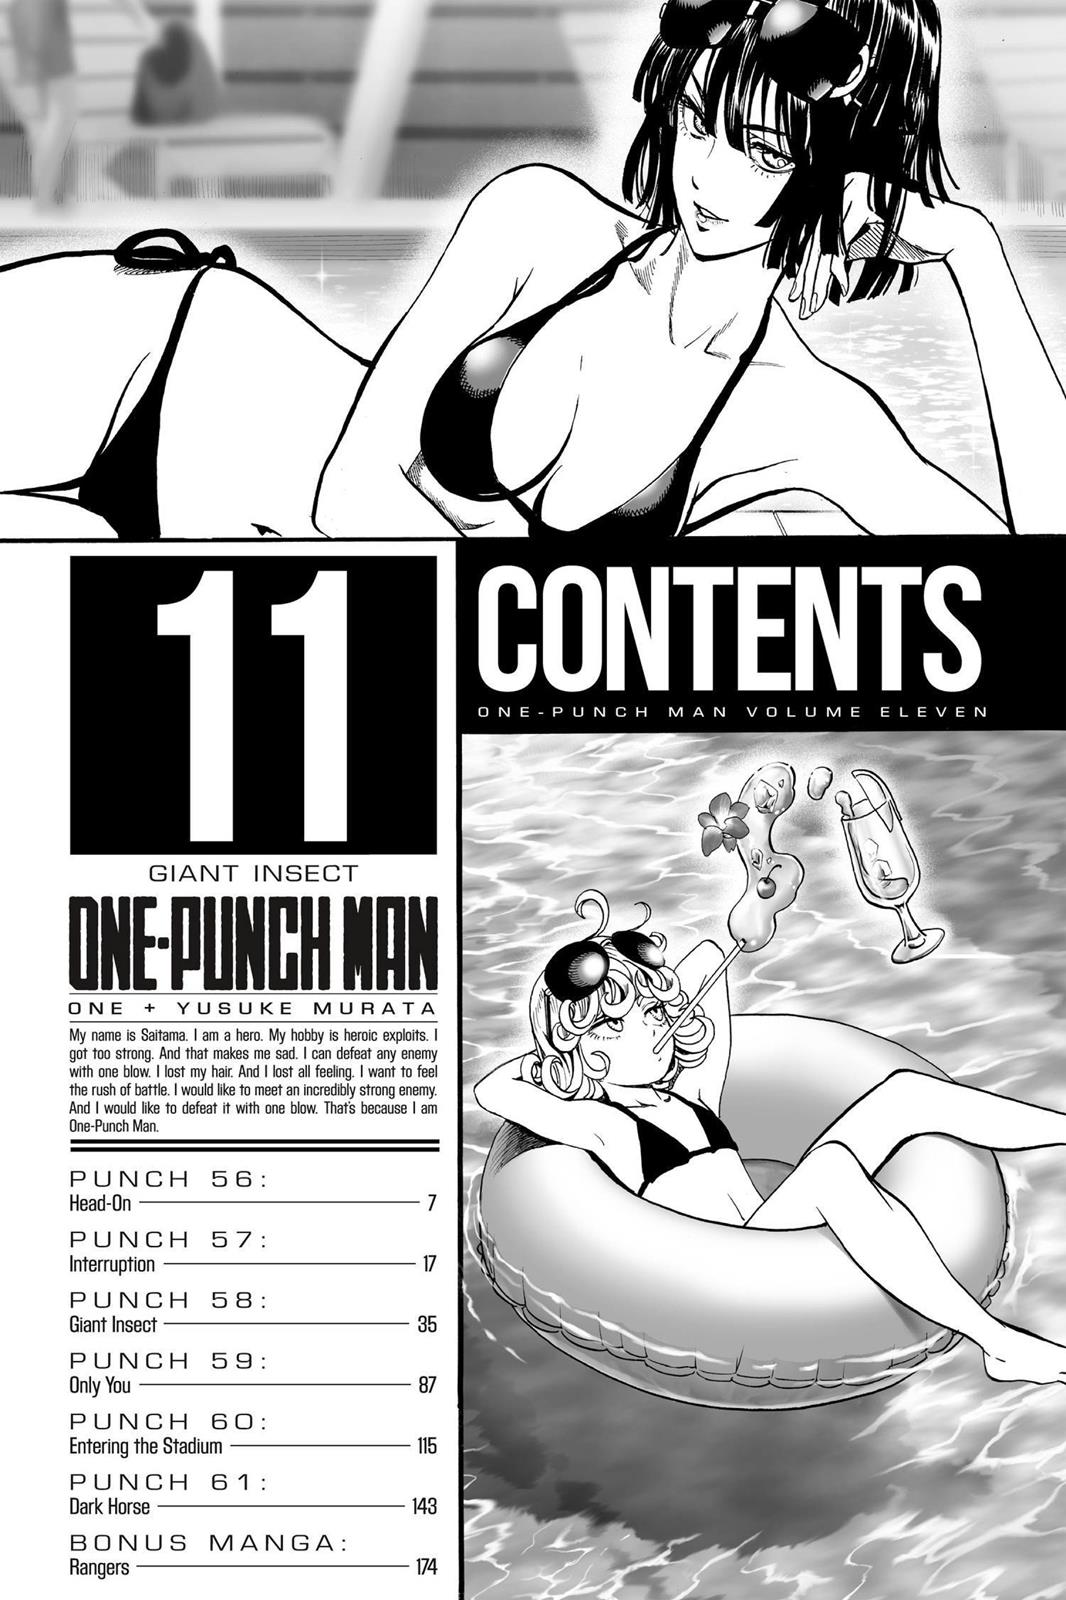 One-Punch Man, Punch 56 image 06